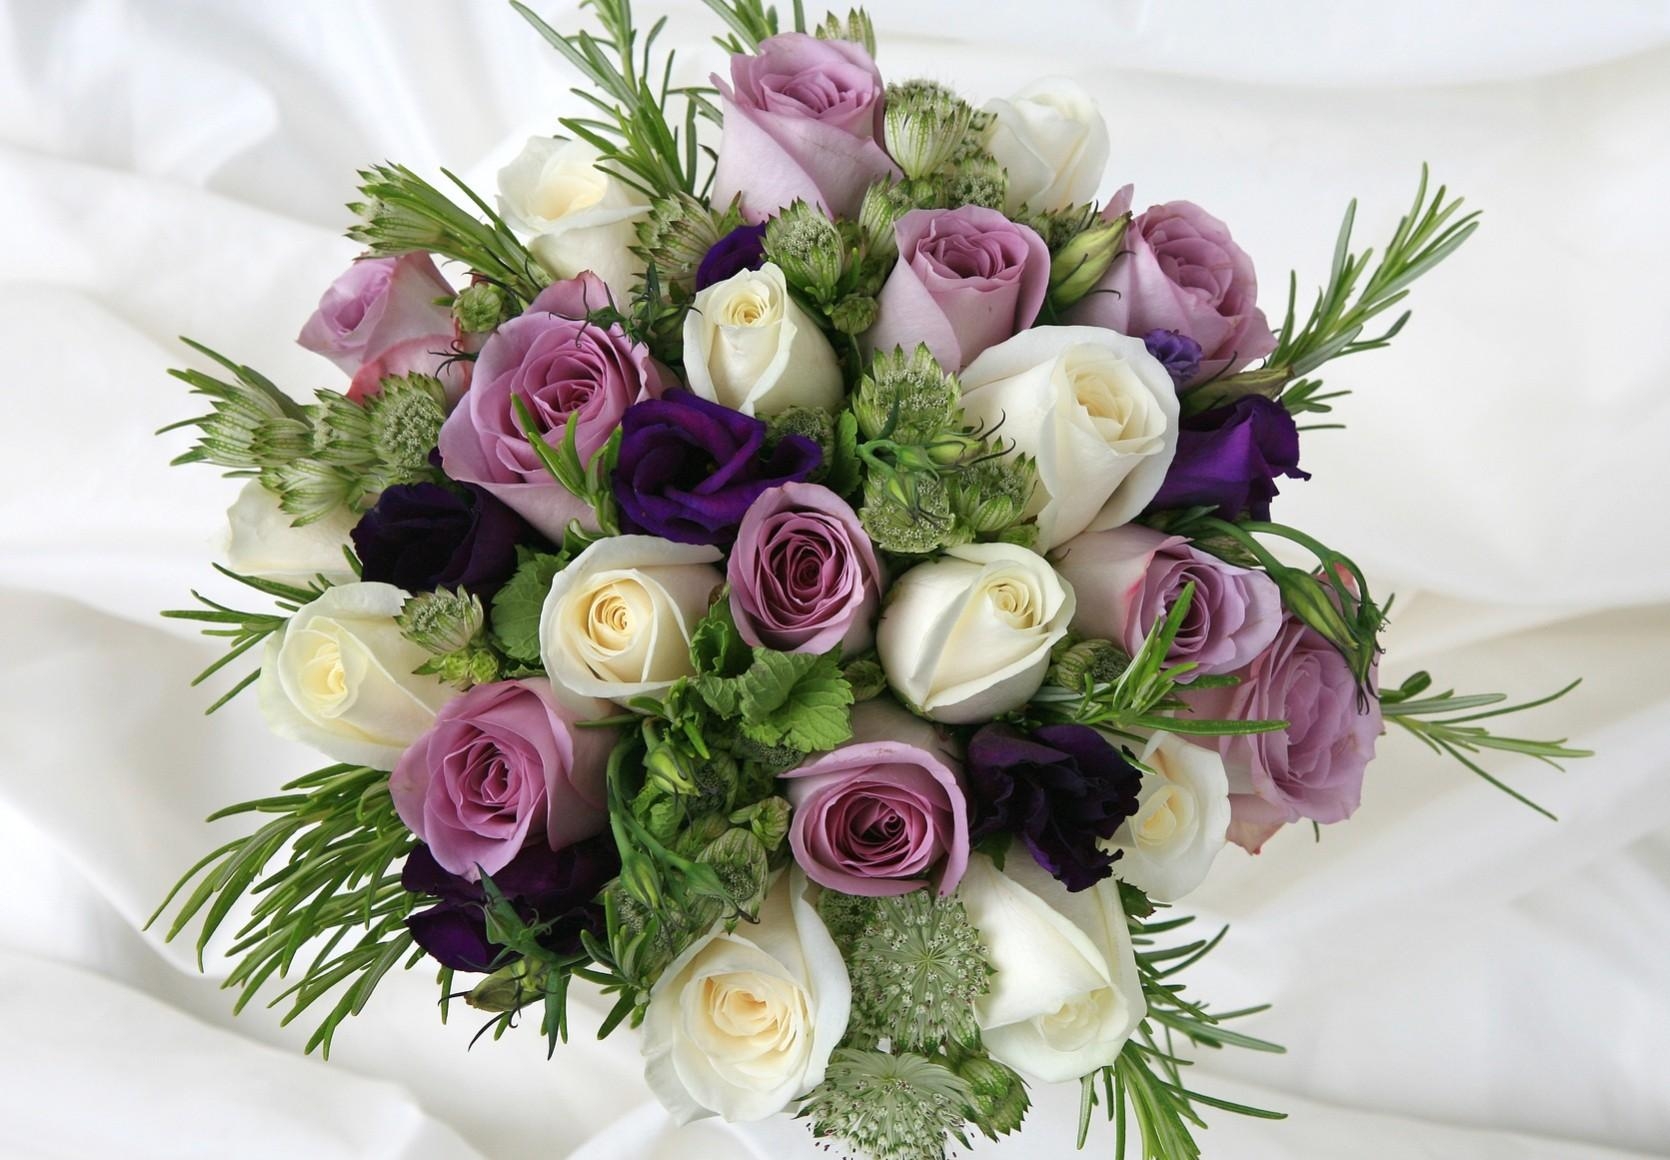 roses, flowers, bouquet, composition, lisianthus russell, lisiantus russell